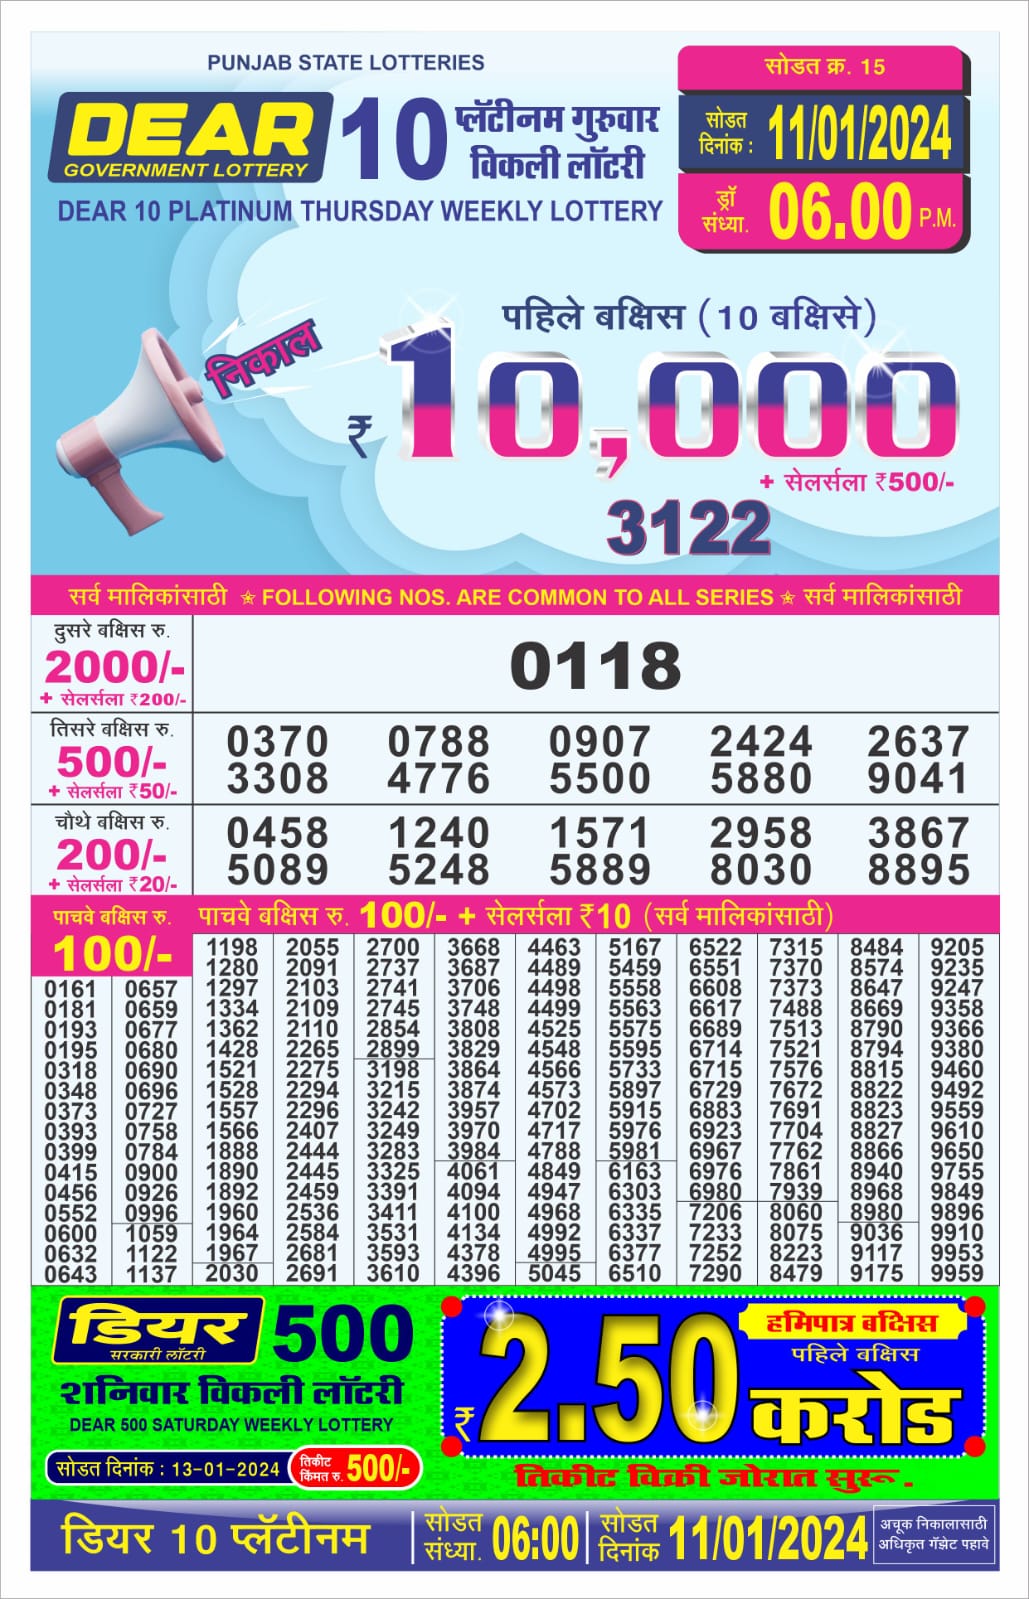 Dear Platinum Thursday Weekly Lottery Result,6 pm, 11.01.2024 All